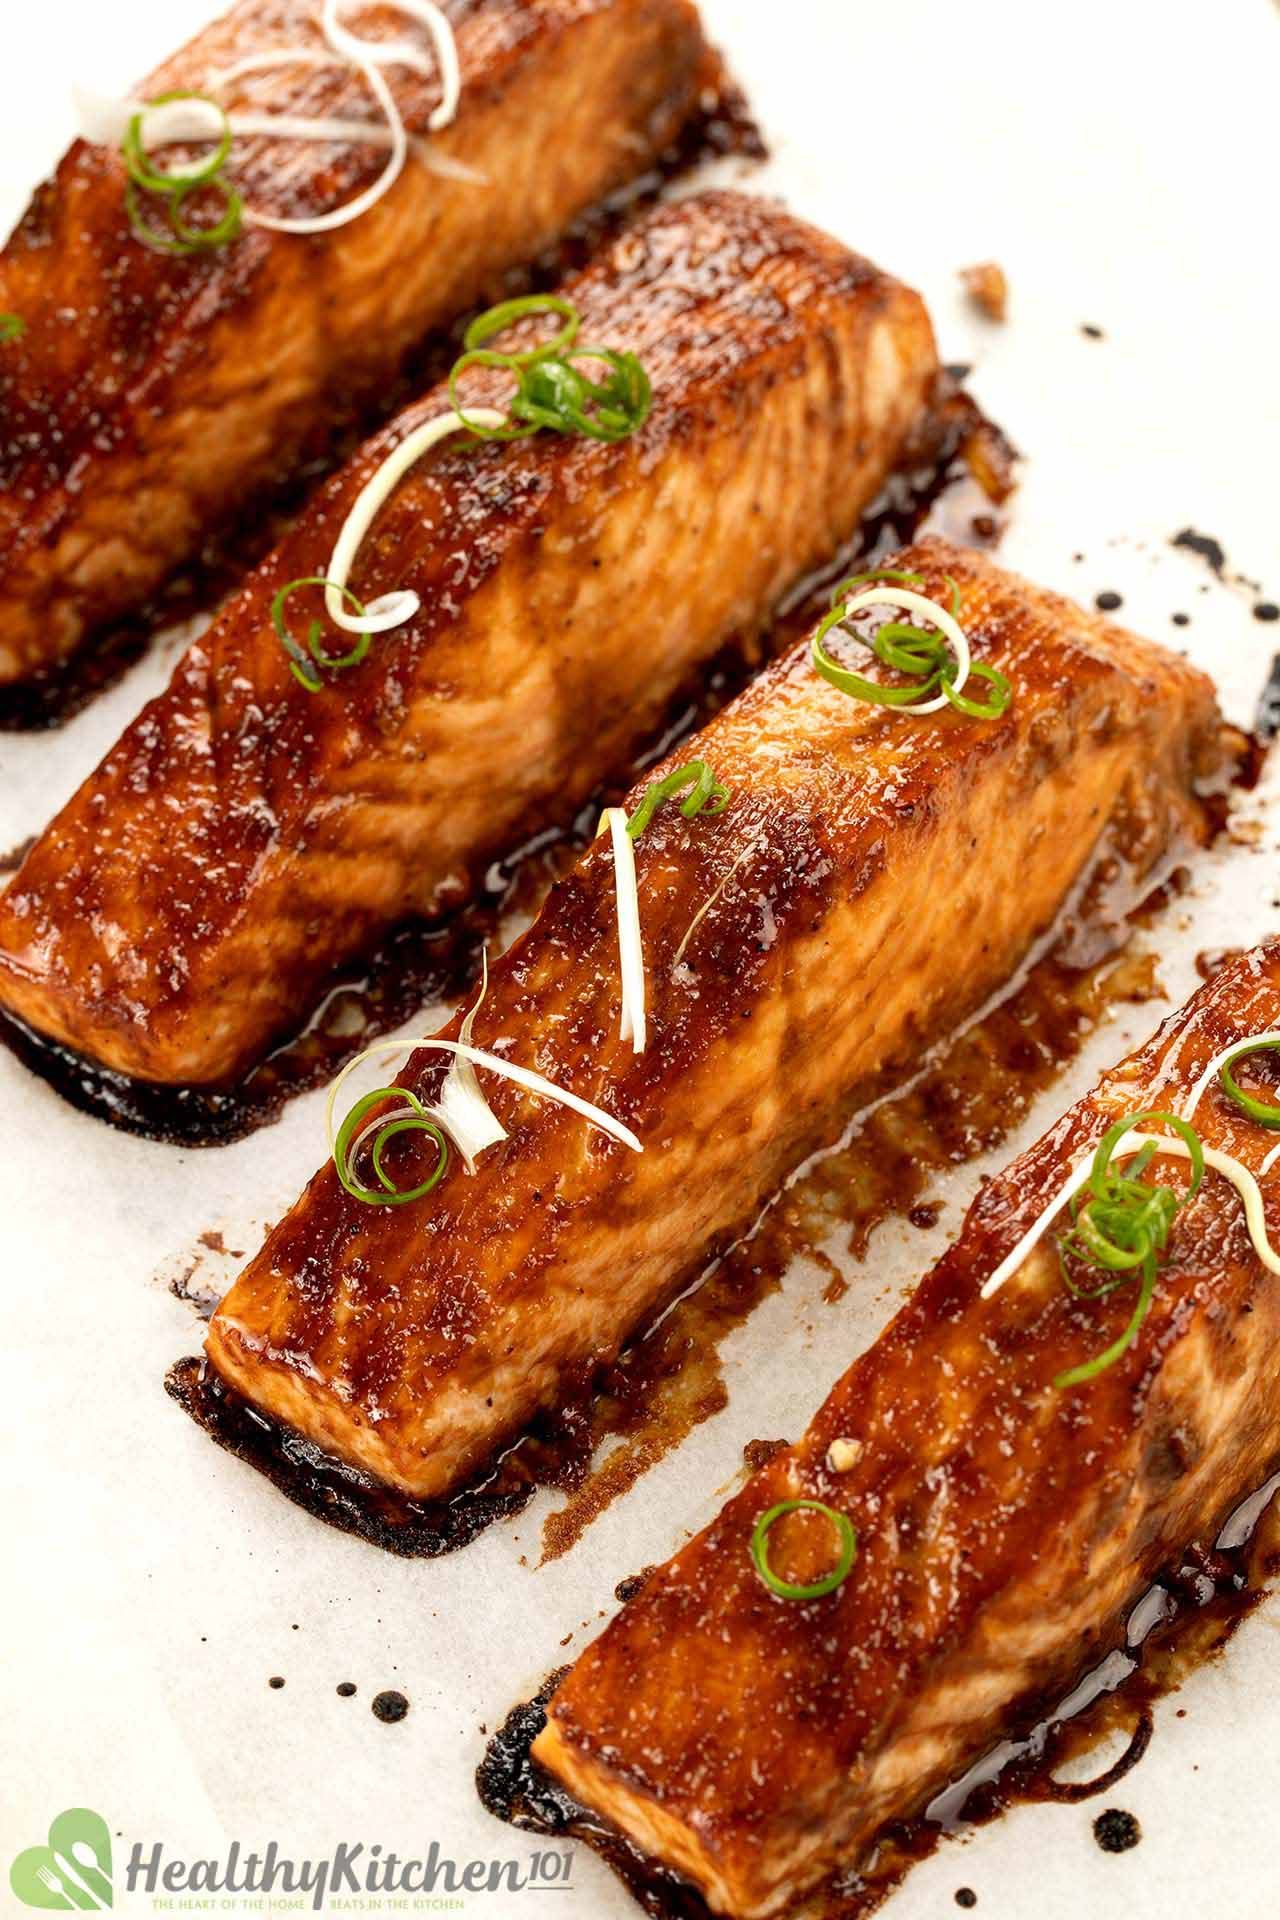 Miso Salmon Recipe - Simple Dish for Hassle-Free Weeknight Dinners